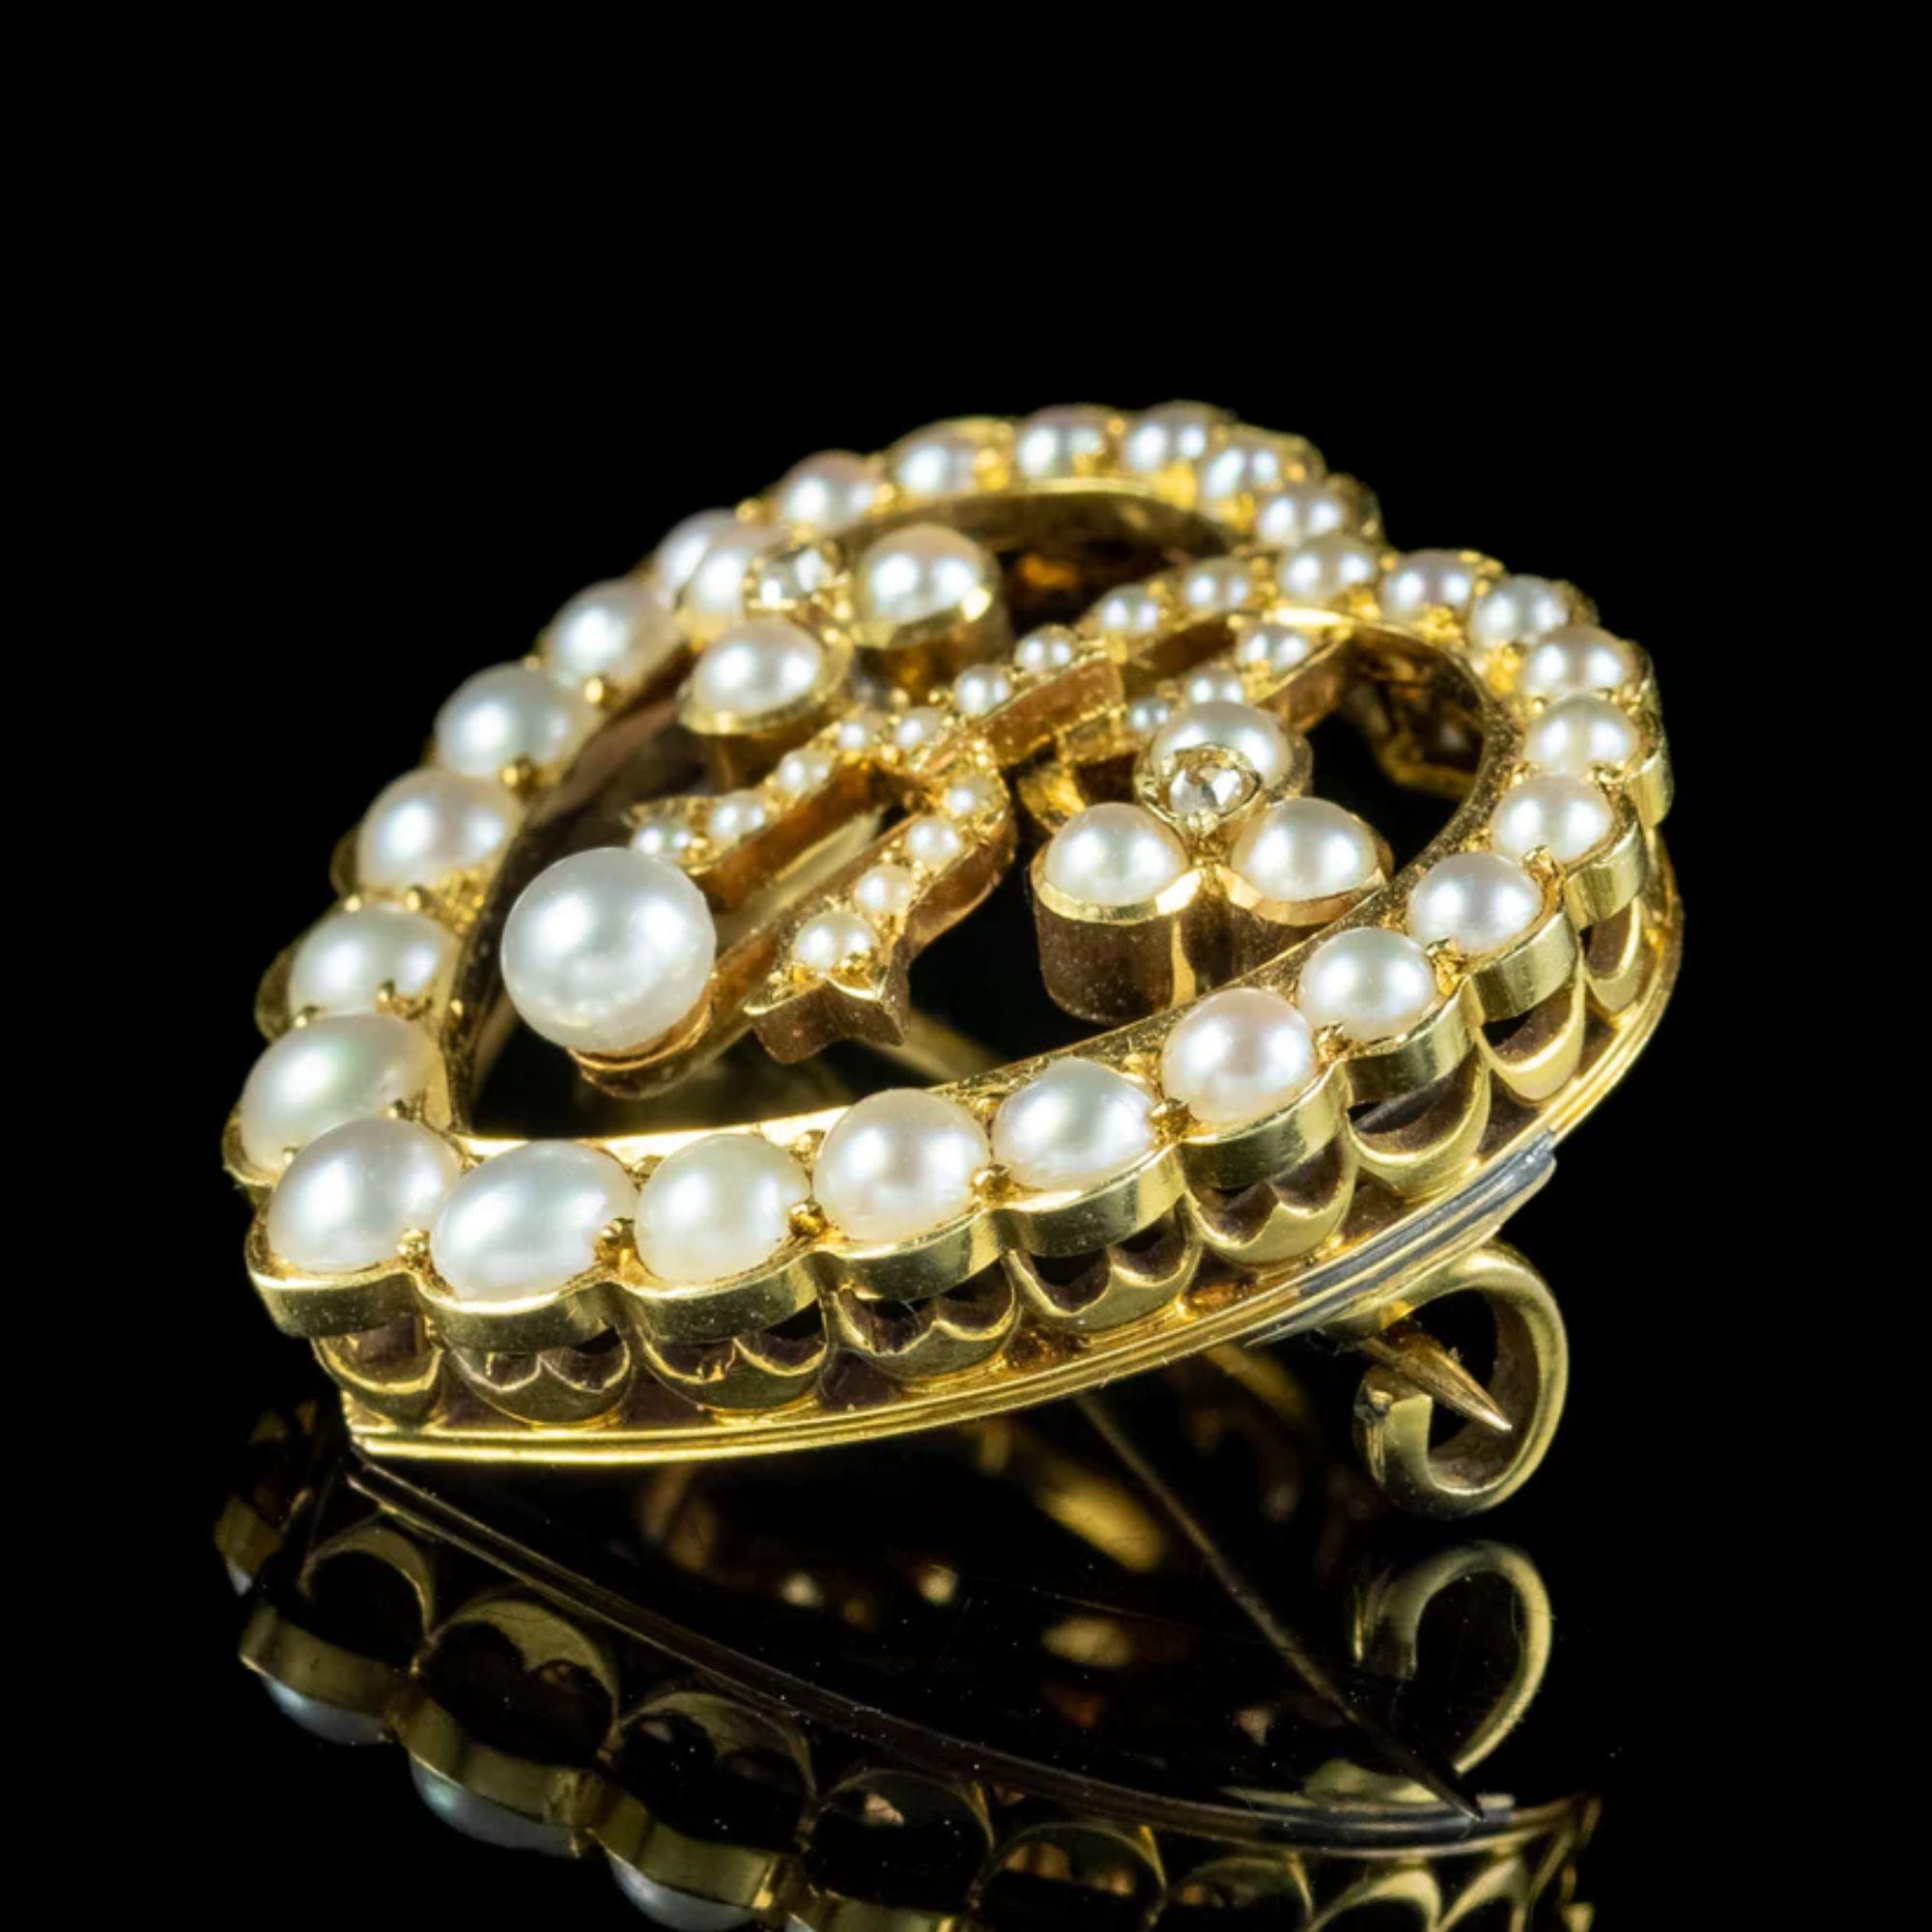 Antique Edwardian Pearl Diamond Heart Brooch in 15 Carat Gold, circa 1901 – 1915 In Good Condition For Sale In Kendal, GB